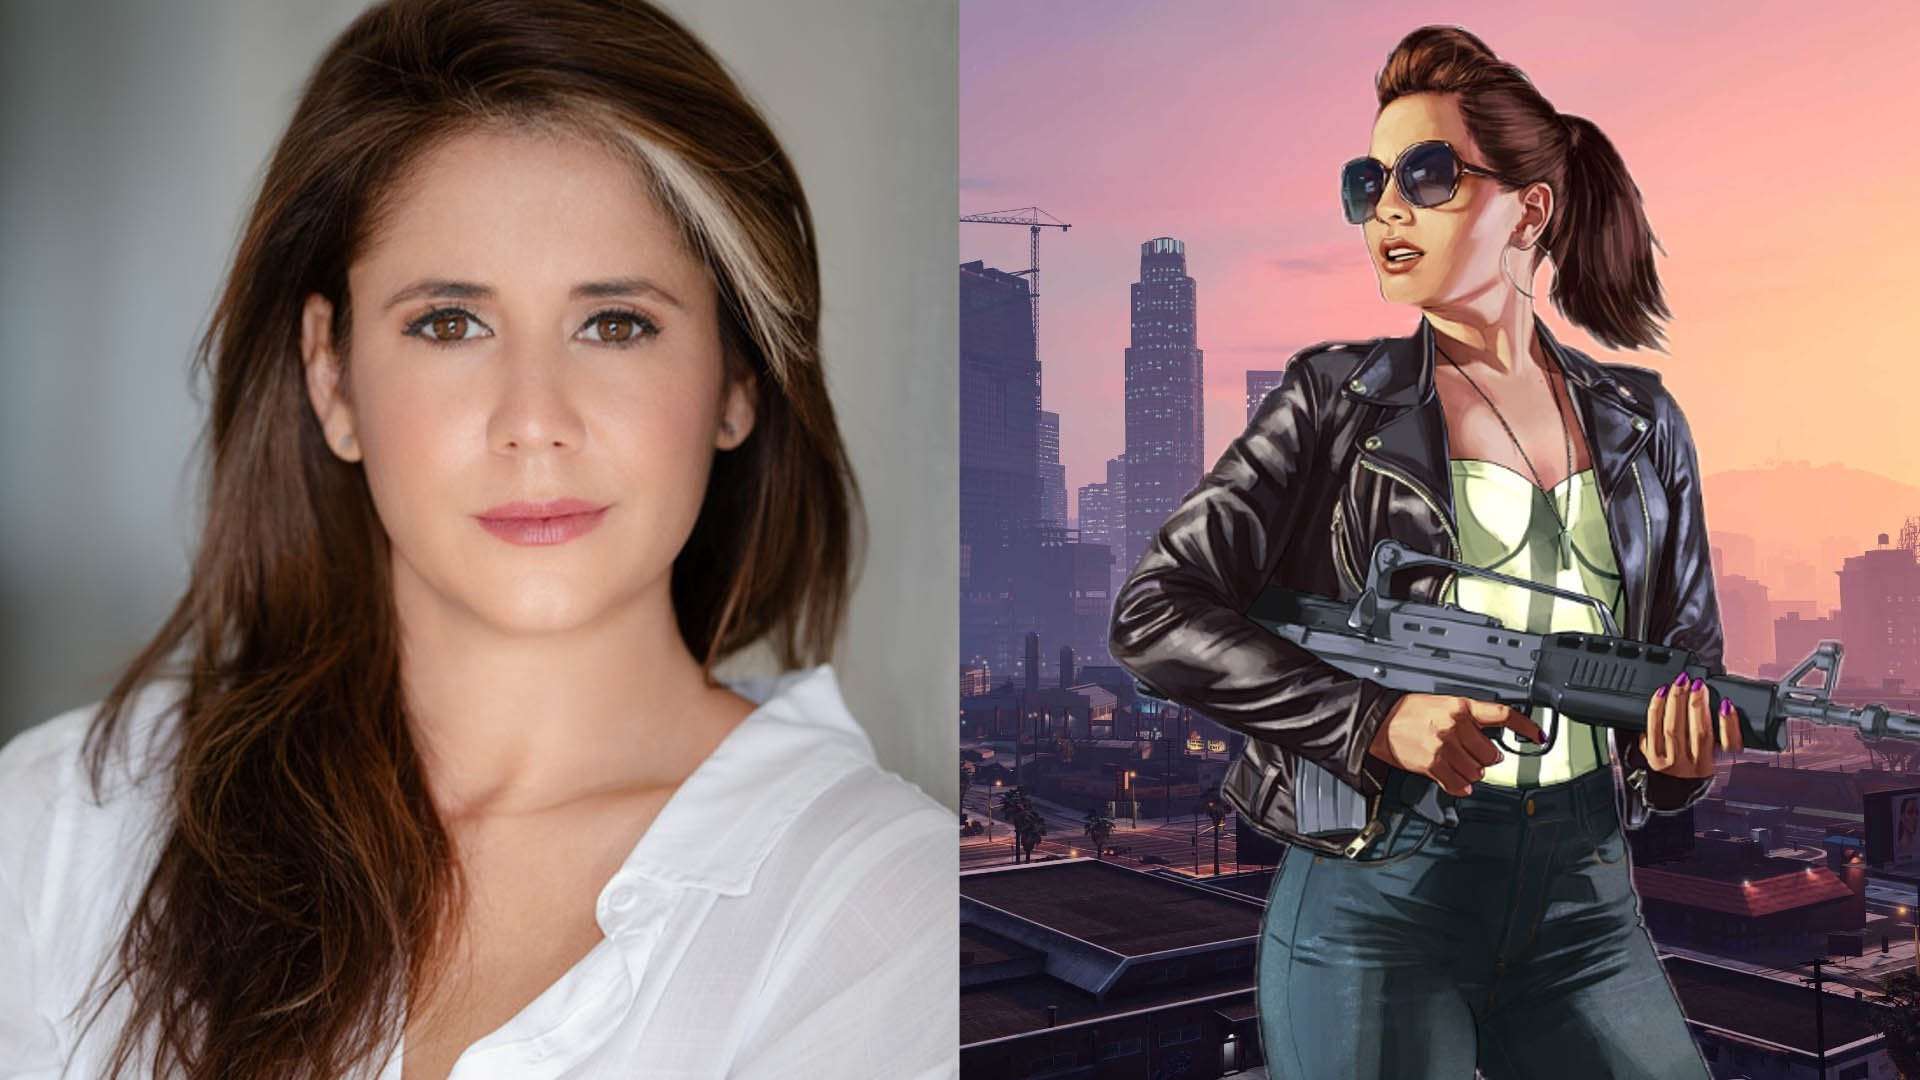 image for Alexandra Echavarri will play in the GTA 6 as female protagonist